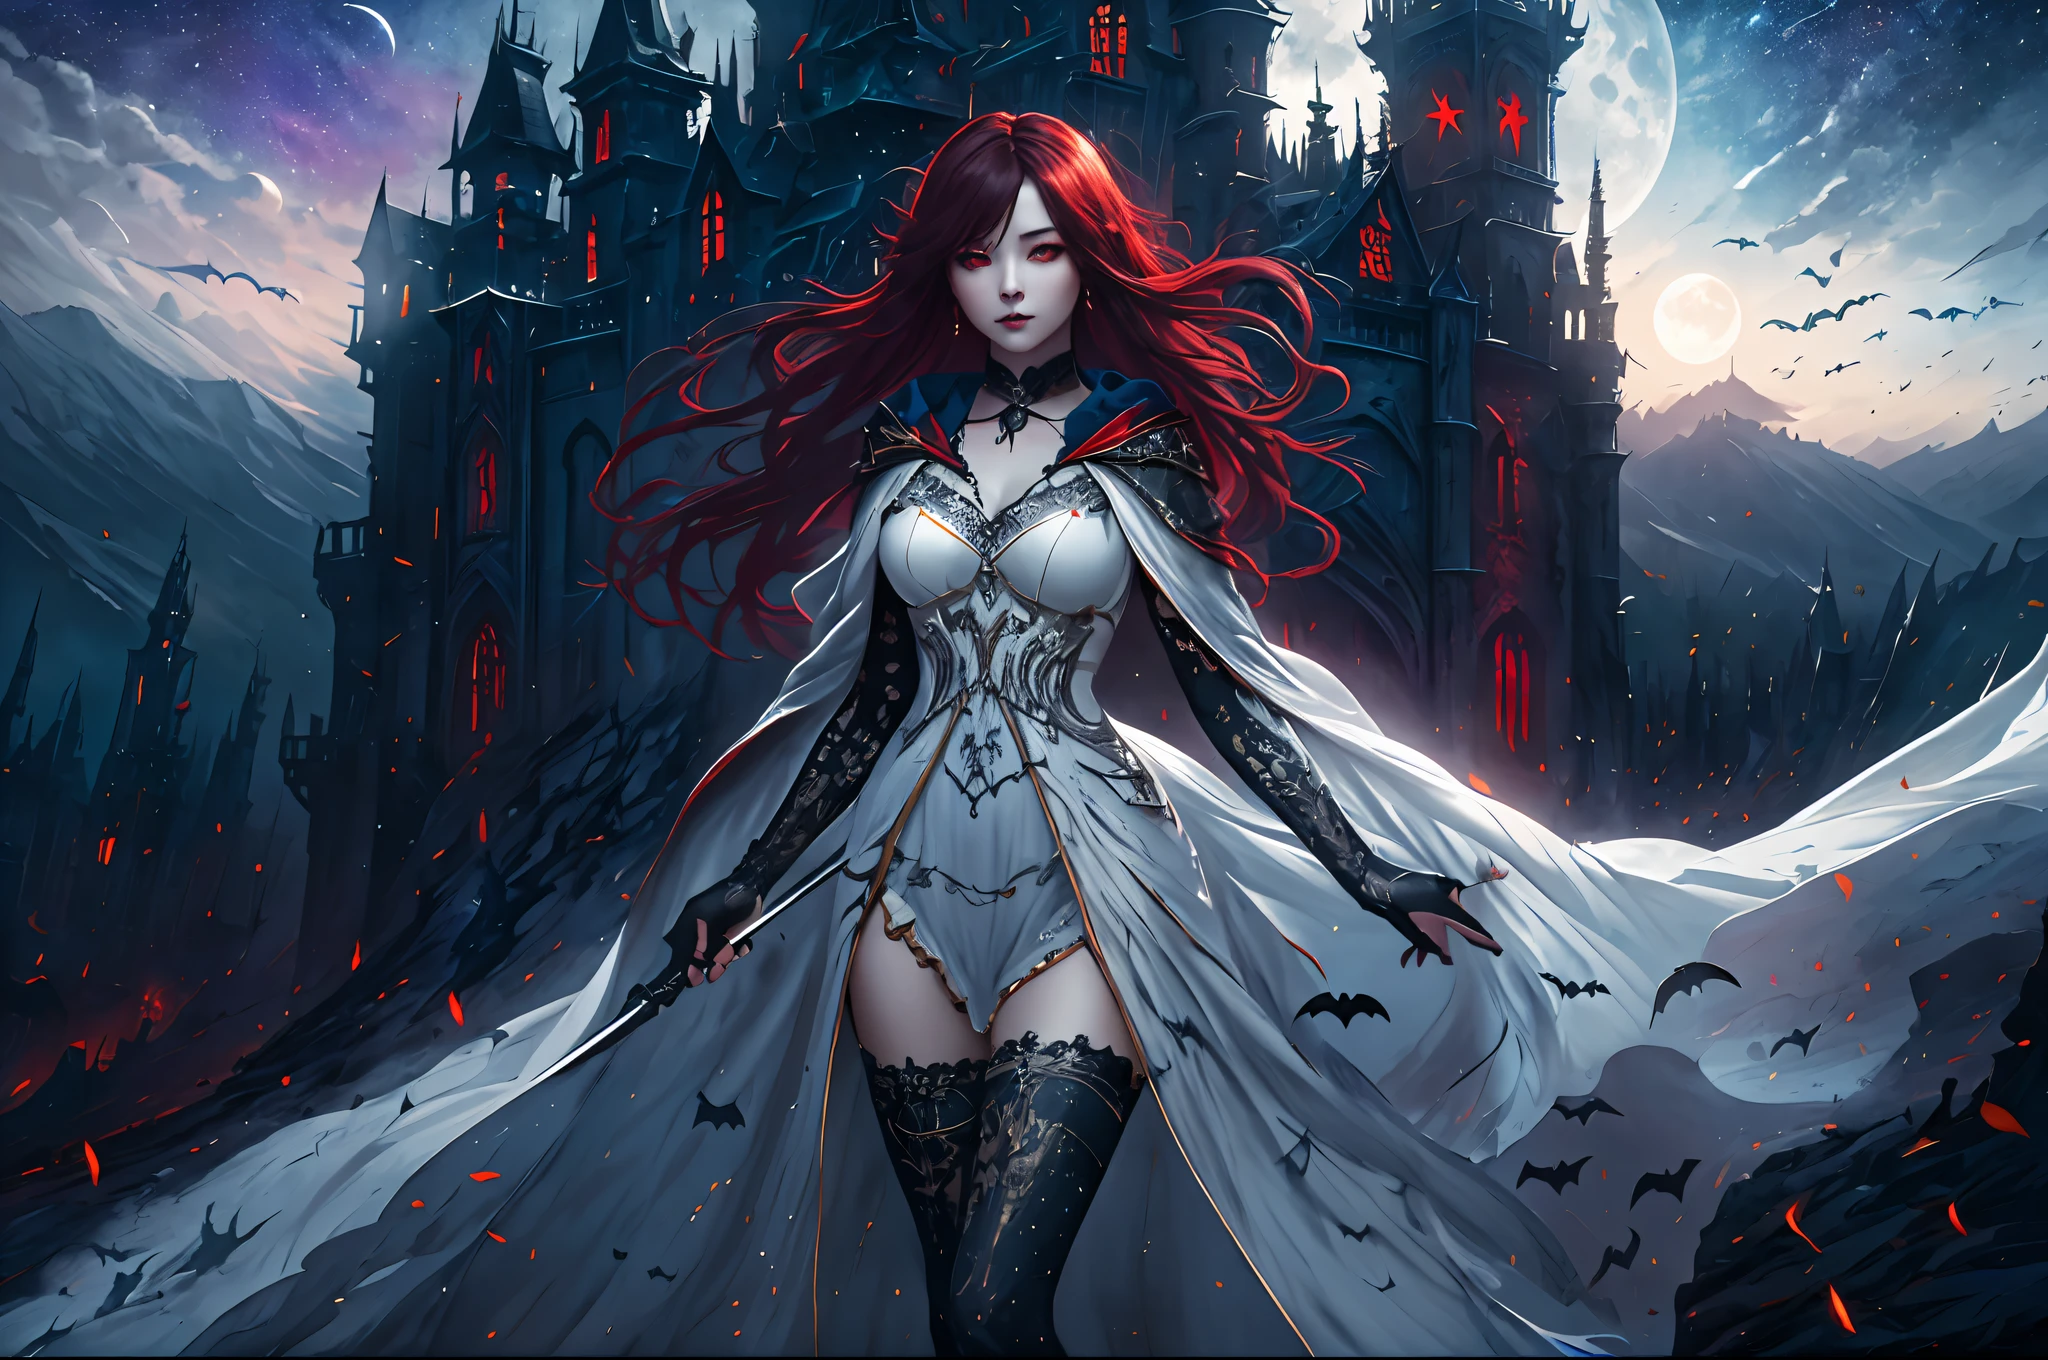 a picture of an exquisite beautiful female vampire standing under the starry night sky on the porch of her castle, dynamic angle (ultra detailed, Masterpiece, best quality), ultra detailed face (ultra detailed, Masterpiece, best quality), ultra feminine, grey skin, red hair, wavy hair, dynamic eyes color, cold eyes, glowing eyes, intense eyes, dark red lips, [fangs], wearing white dress (ultra detailed, Masterpiece, best quality), blue cloak (ultra detailed, Masterpiece, best quality), long cloak, flowing cloak (ultra detailed, Masterpiece, best quality), high heeled boots, sky full of stars background, fantasy_night, moon, bats flying about, high details, best quality, 8k, [ultra detailed], masterpiece, best quality, (ultra detailed), full body, ultra wide shot, photorealism, dark fantasy art, dark fantasy art, gothic art, many stars, dark fantasy art, gothic art, sense of dread,